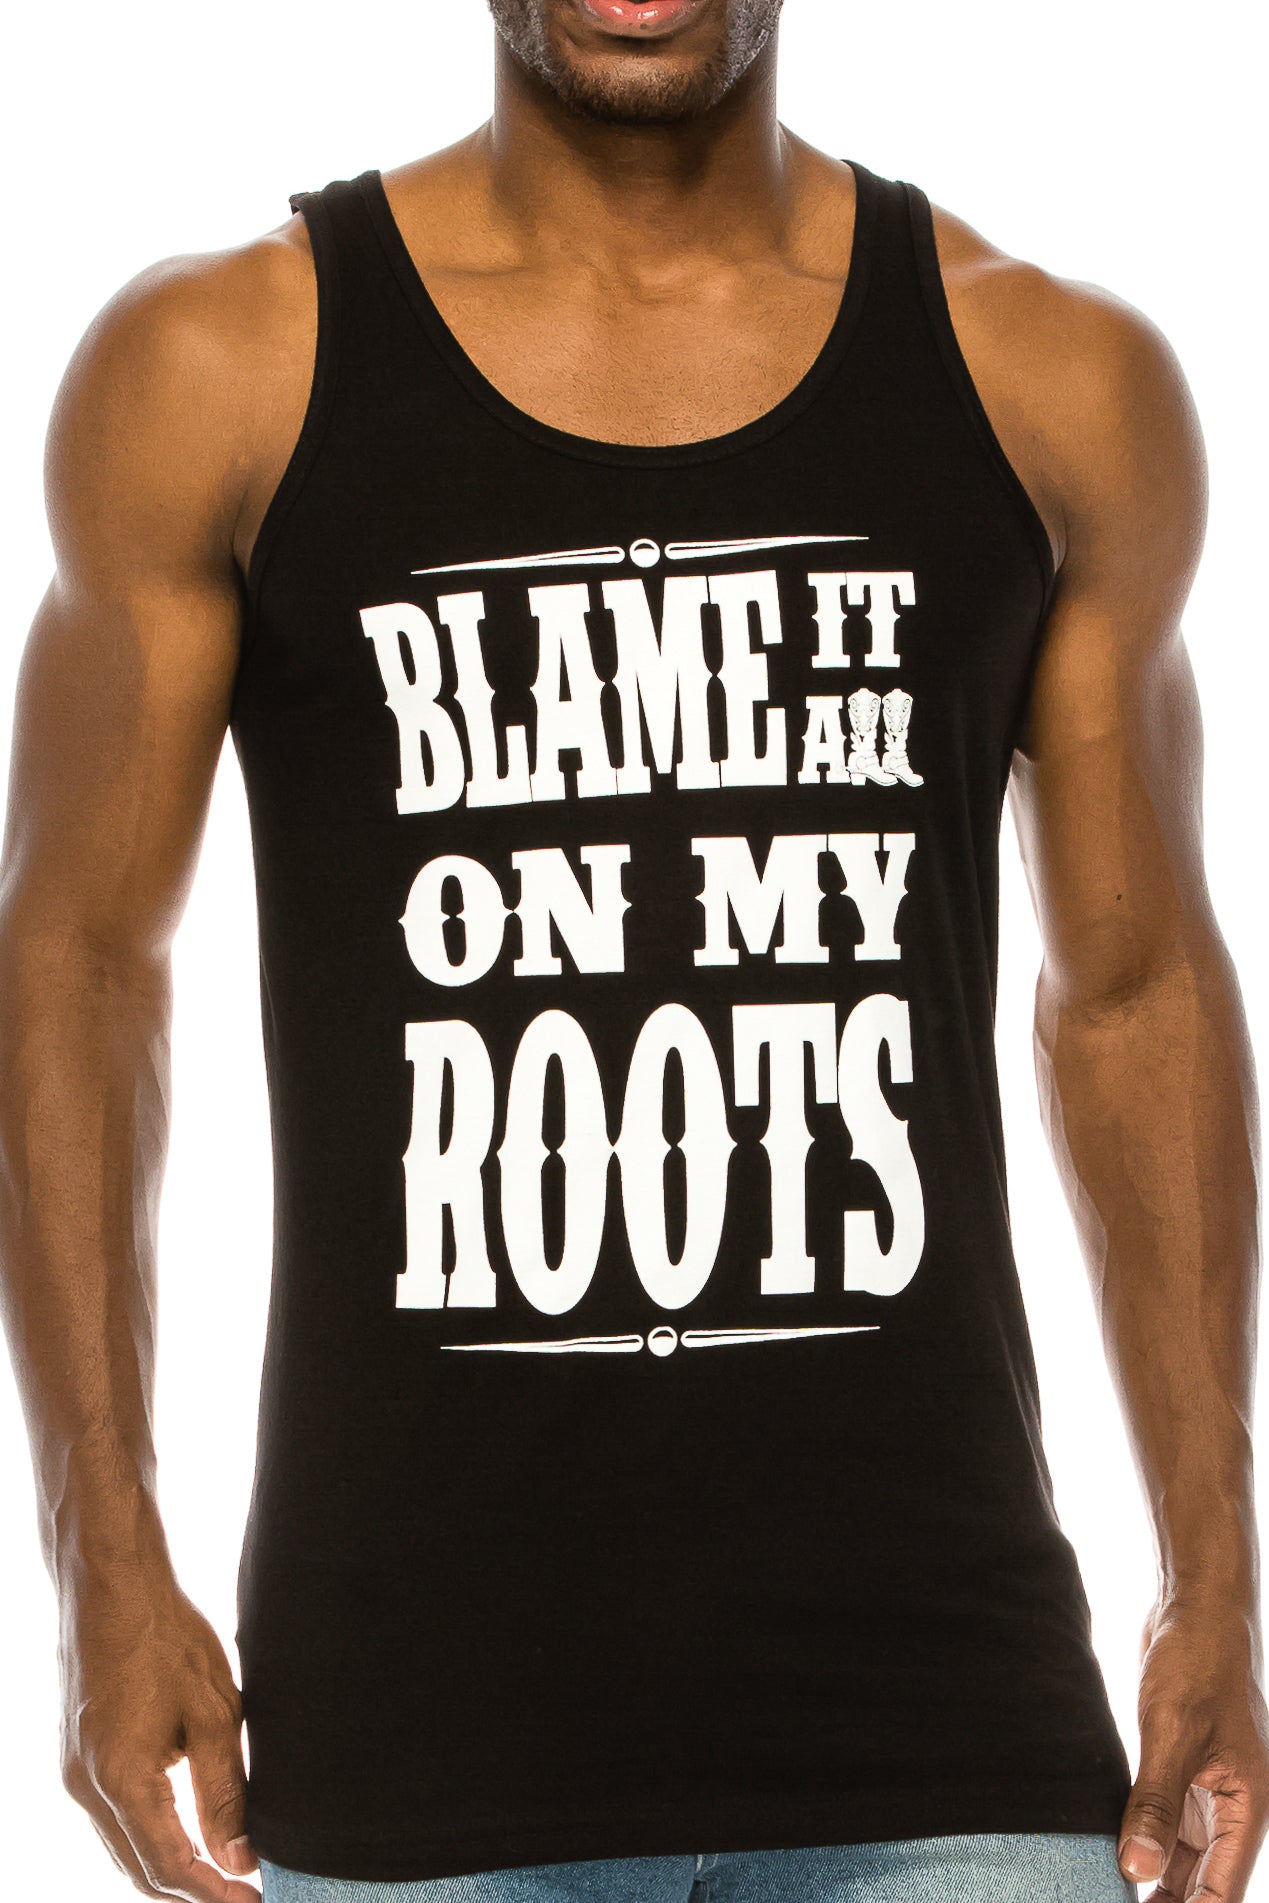 BLAME IT ON MY ROOTS MEN'S TANK - Trailsclothing.com